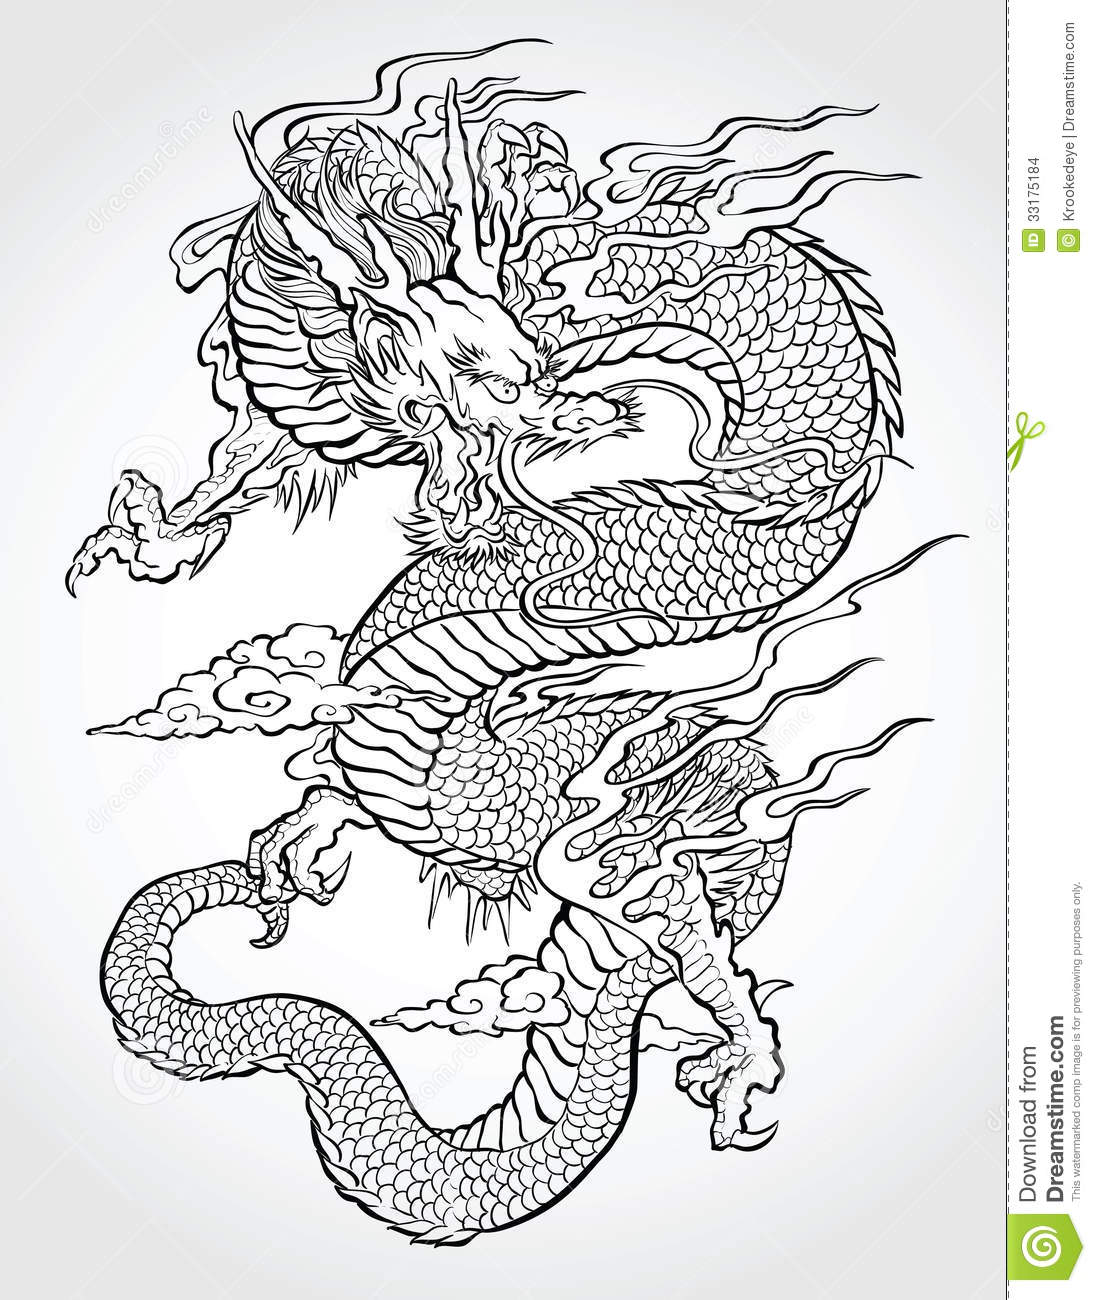 Traditional Asian Dragon Stock Images   Image  33175184